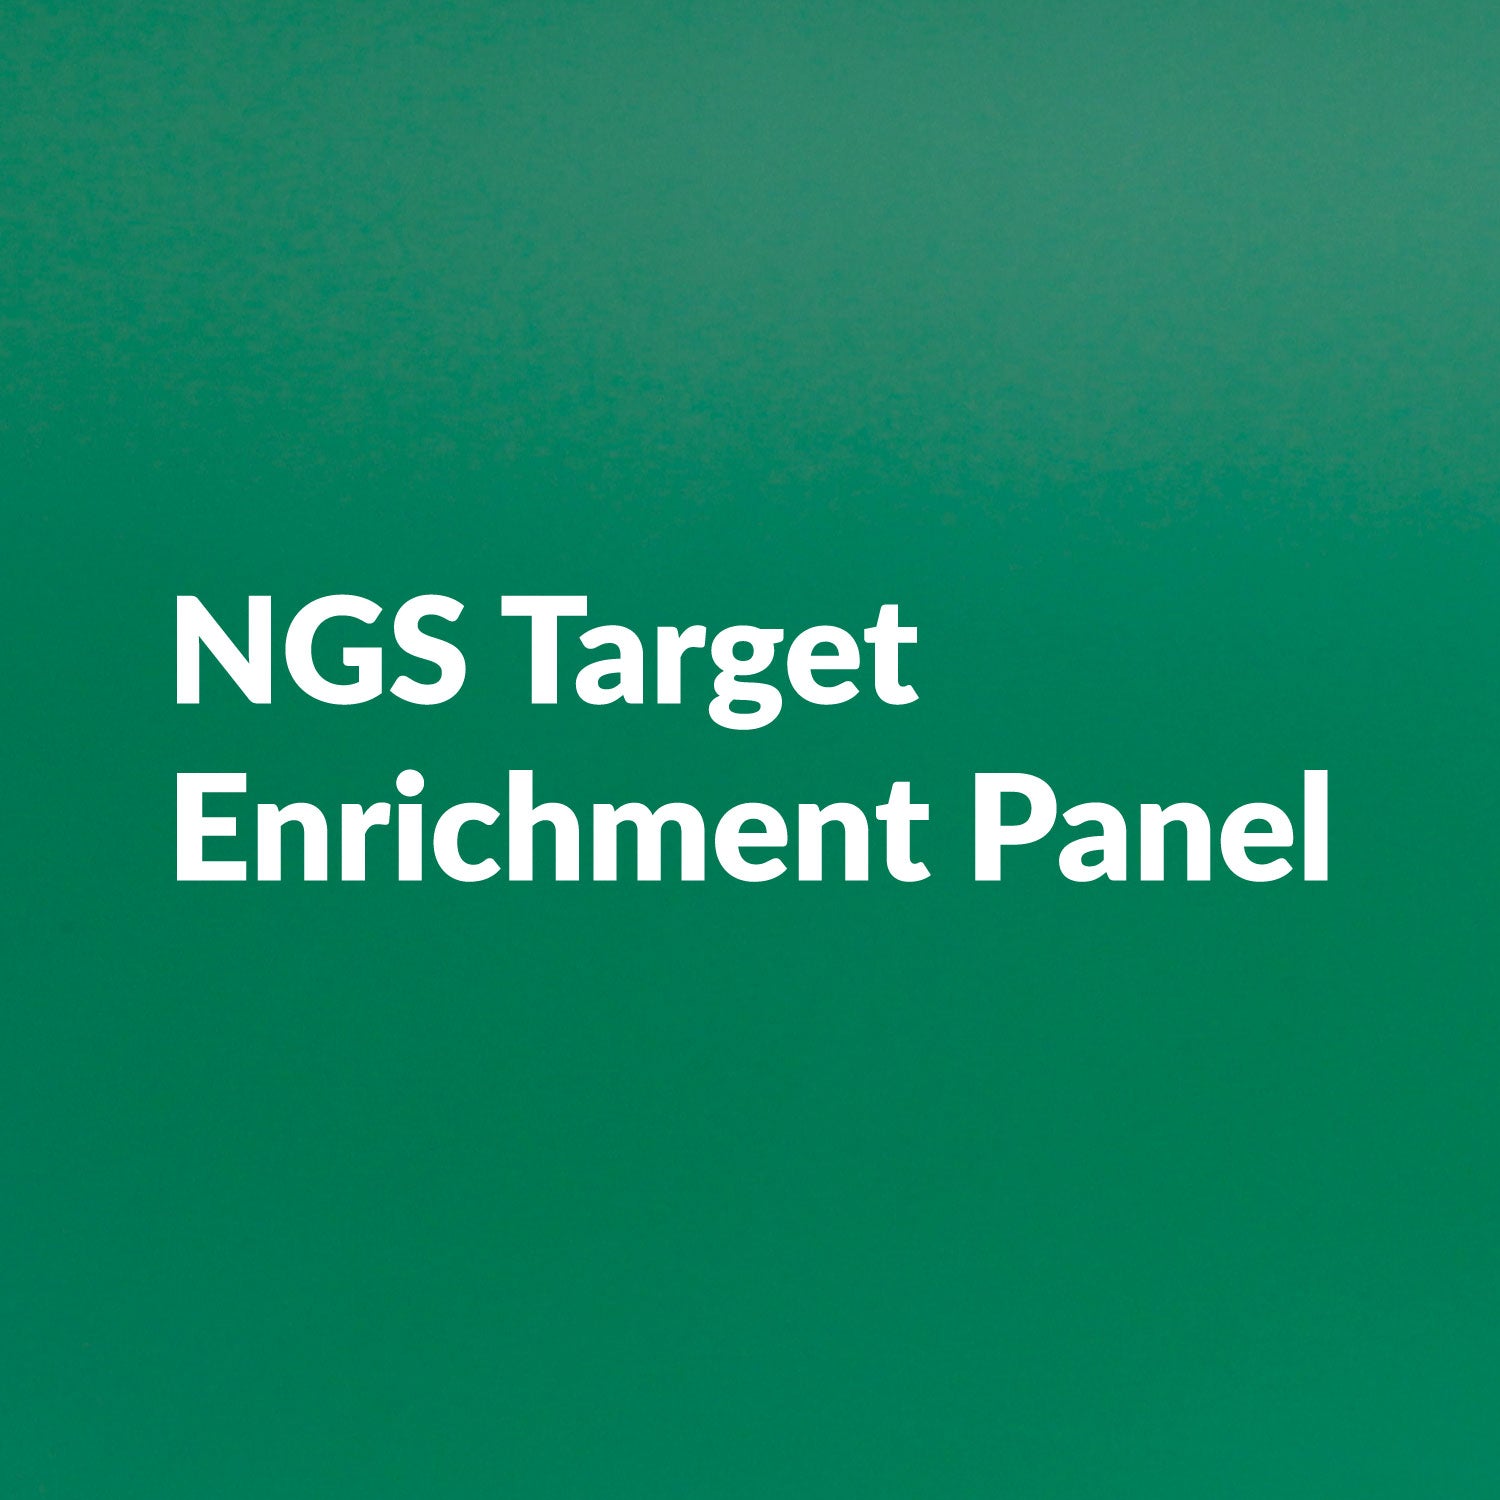 NGS Target Enrichment Panel